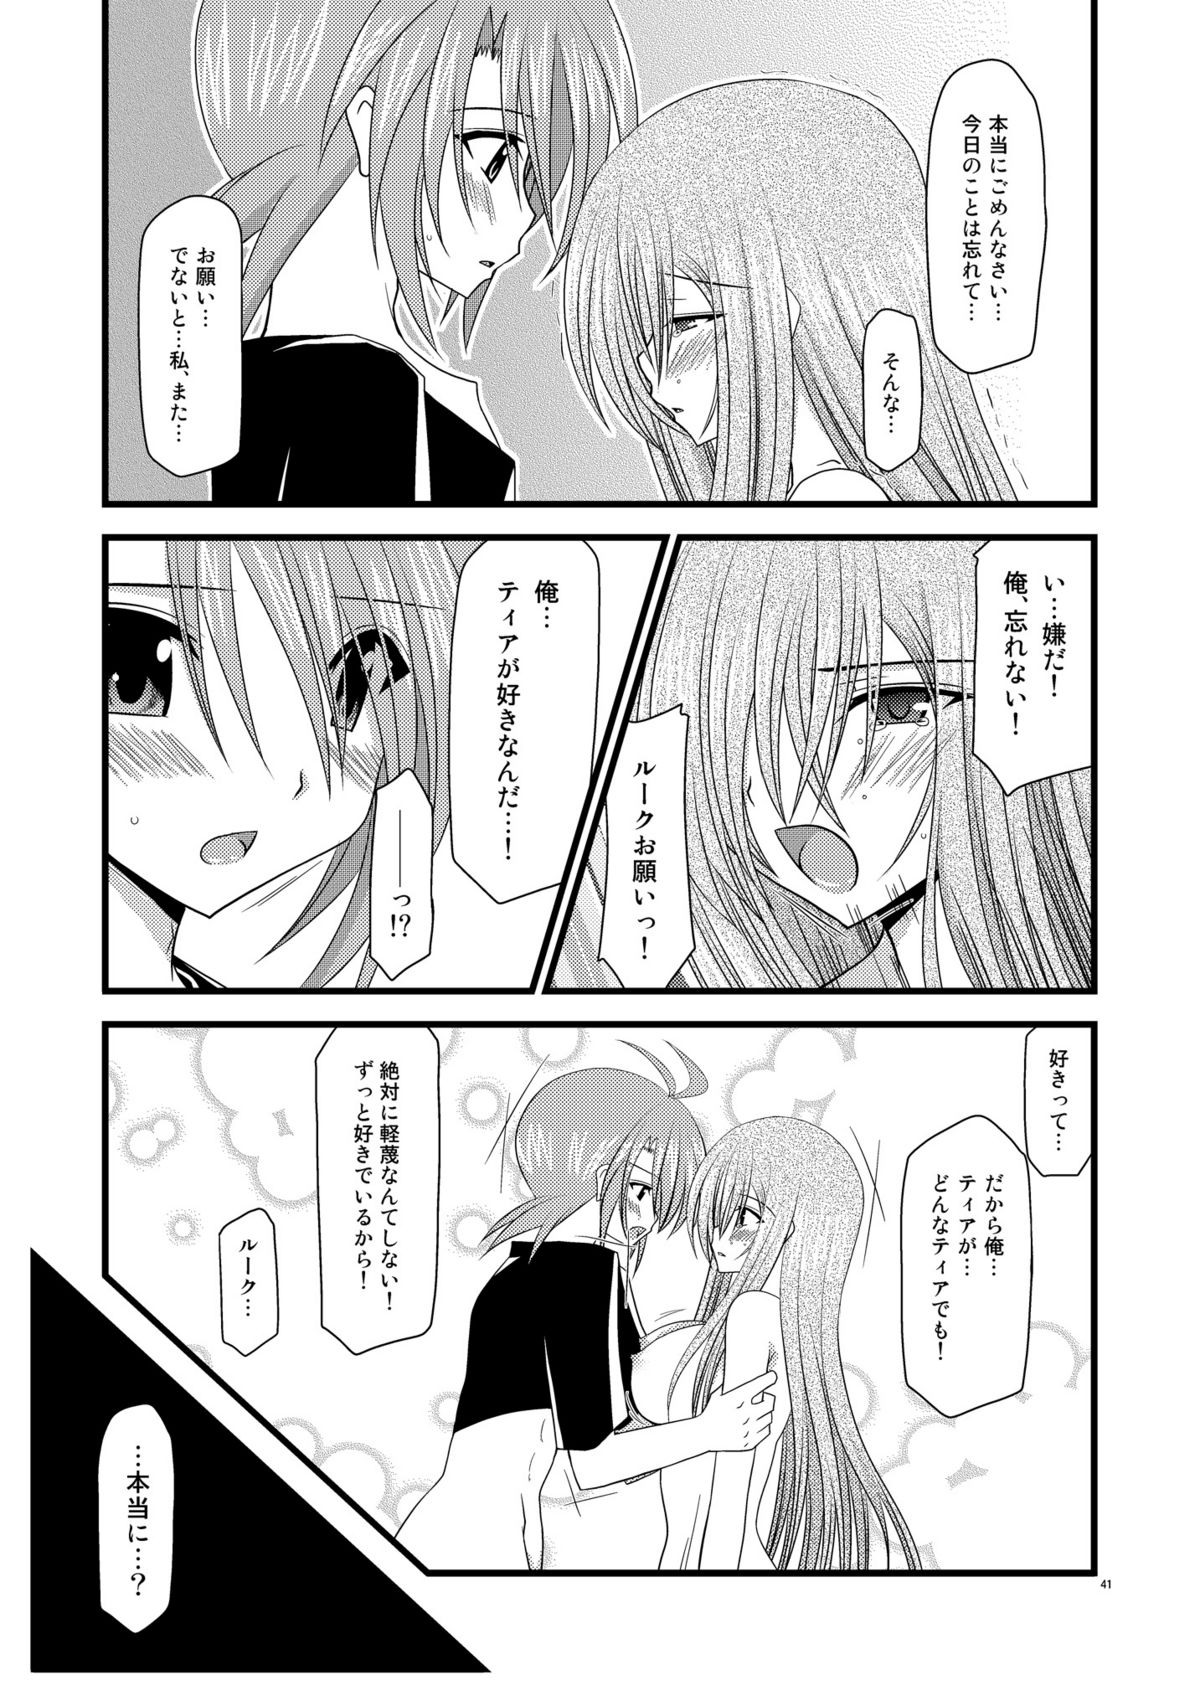 (SC41) [valssu] Melon Niku Bittake! V -the last- (Tales of the Abyss) page 41 full